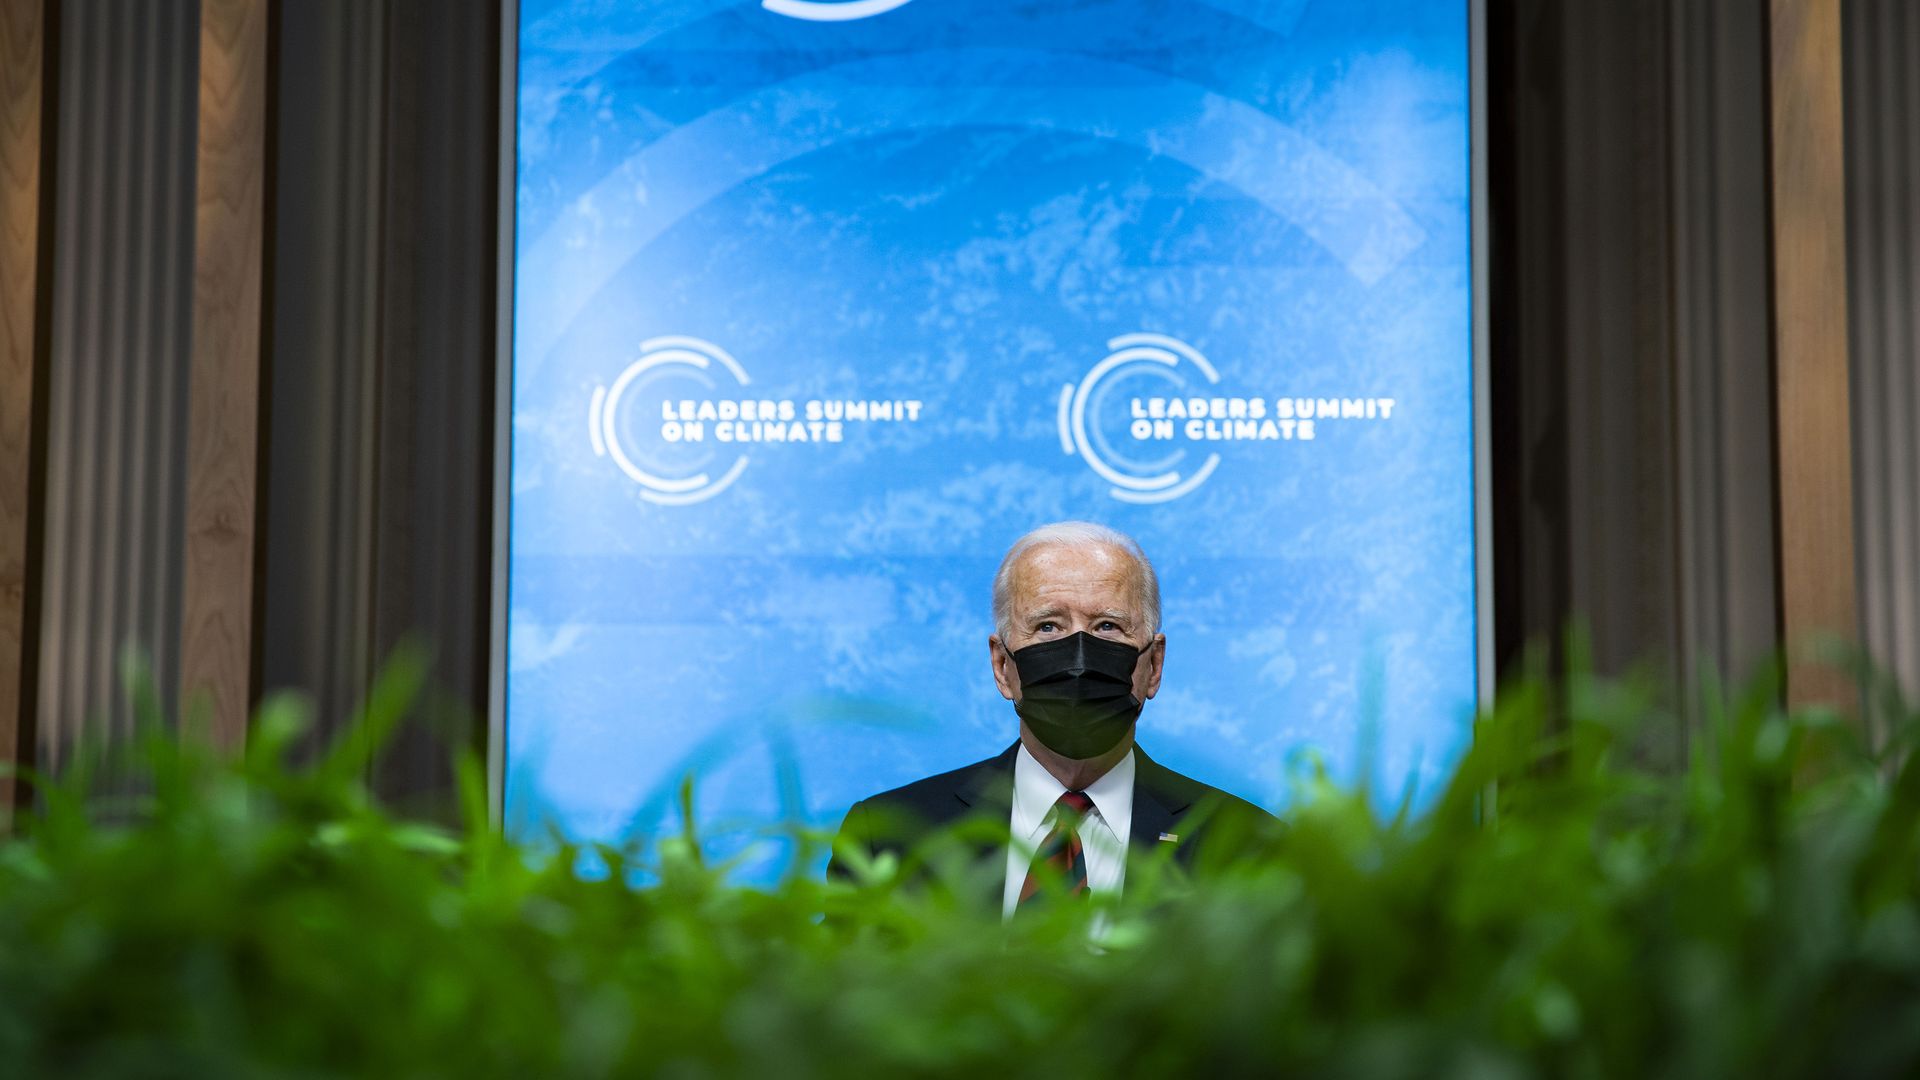 President Biden during the virtual Leaders Summit on Climate on April 22.